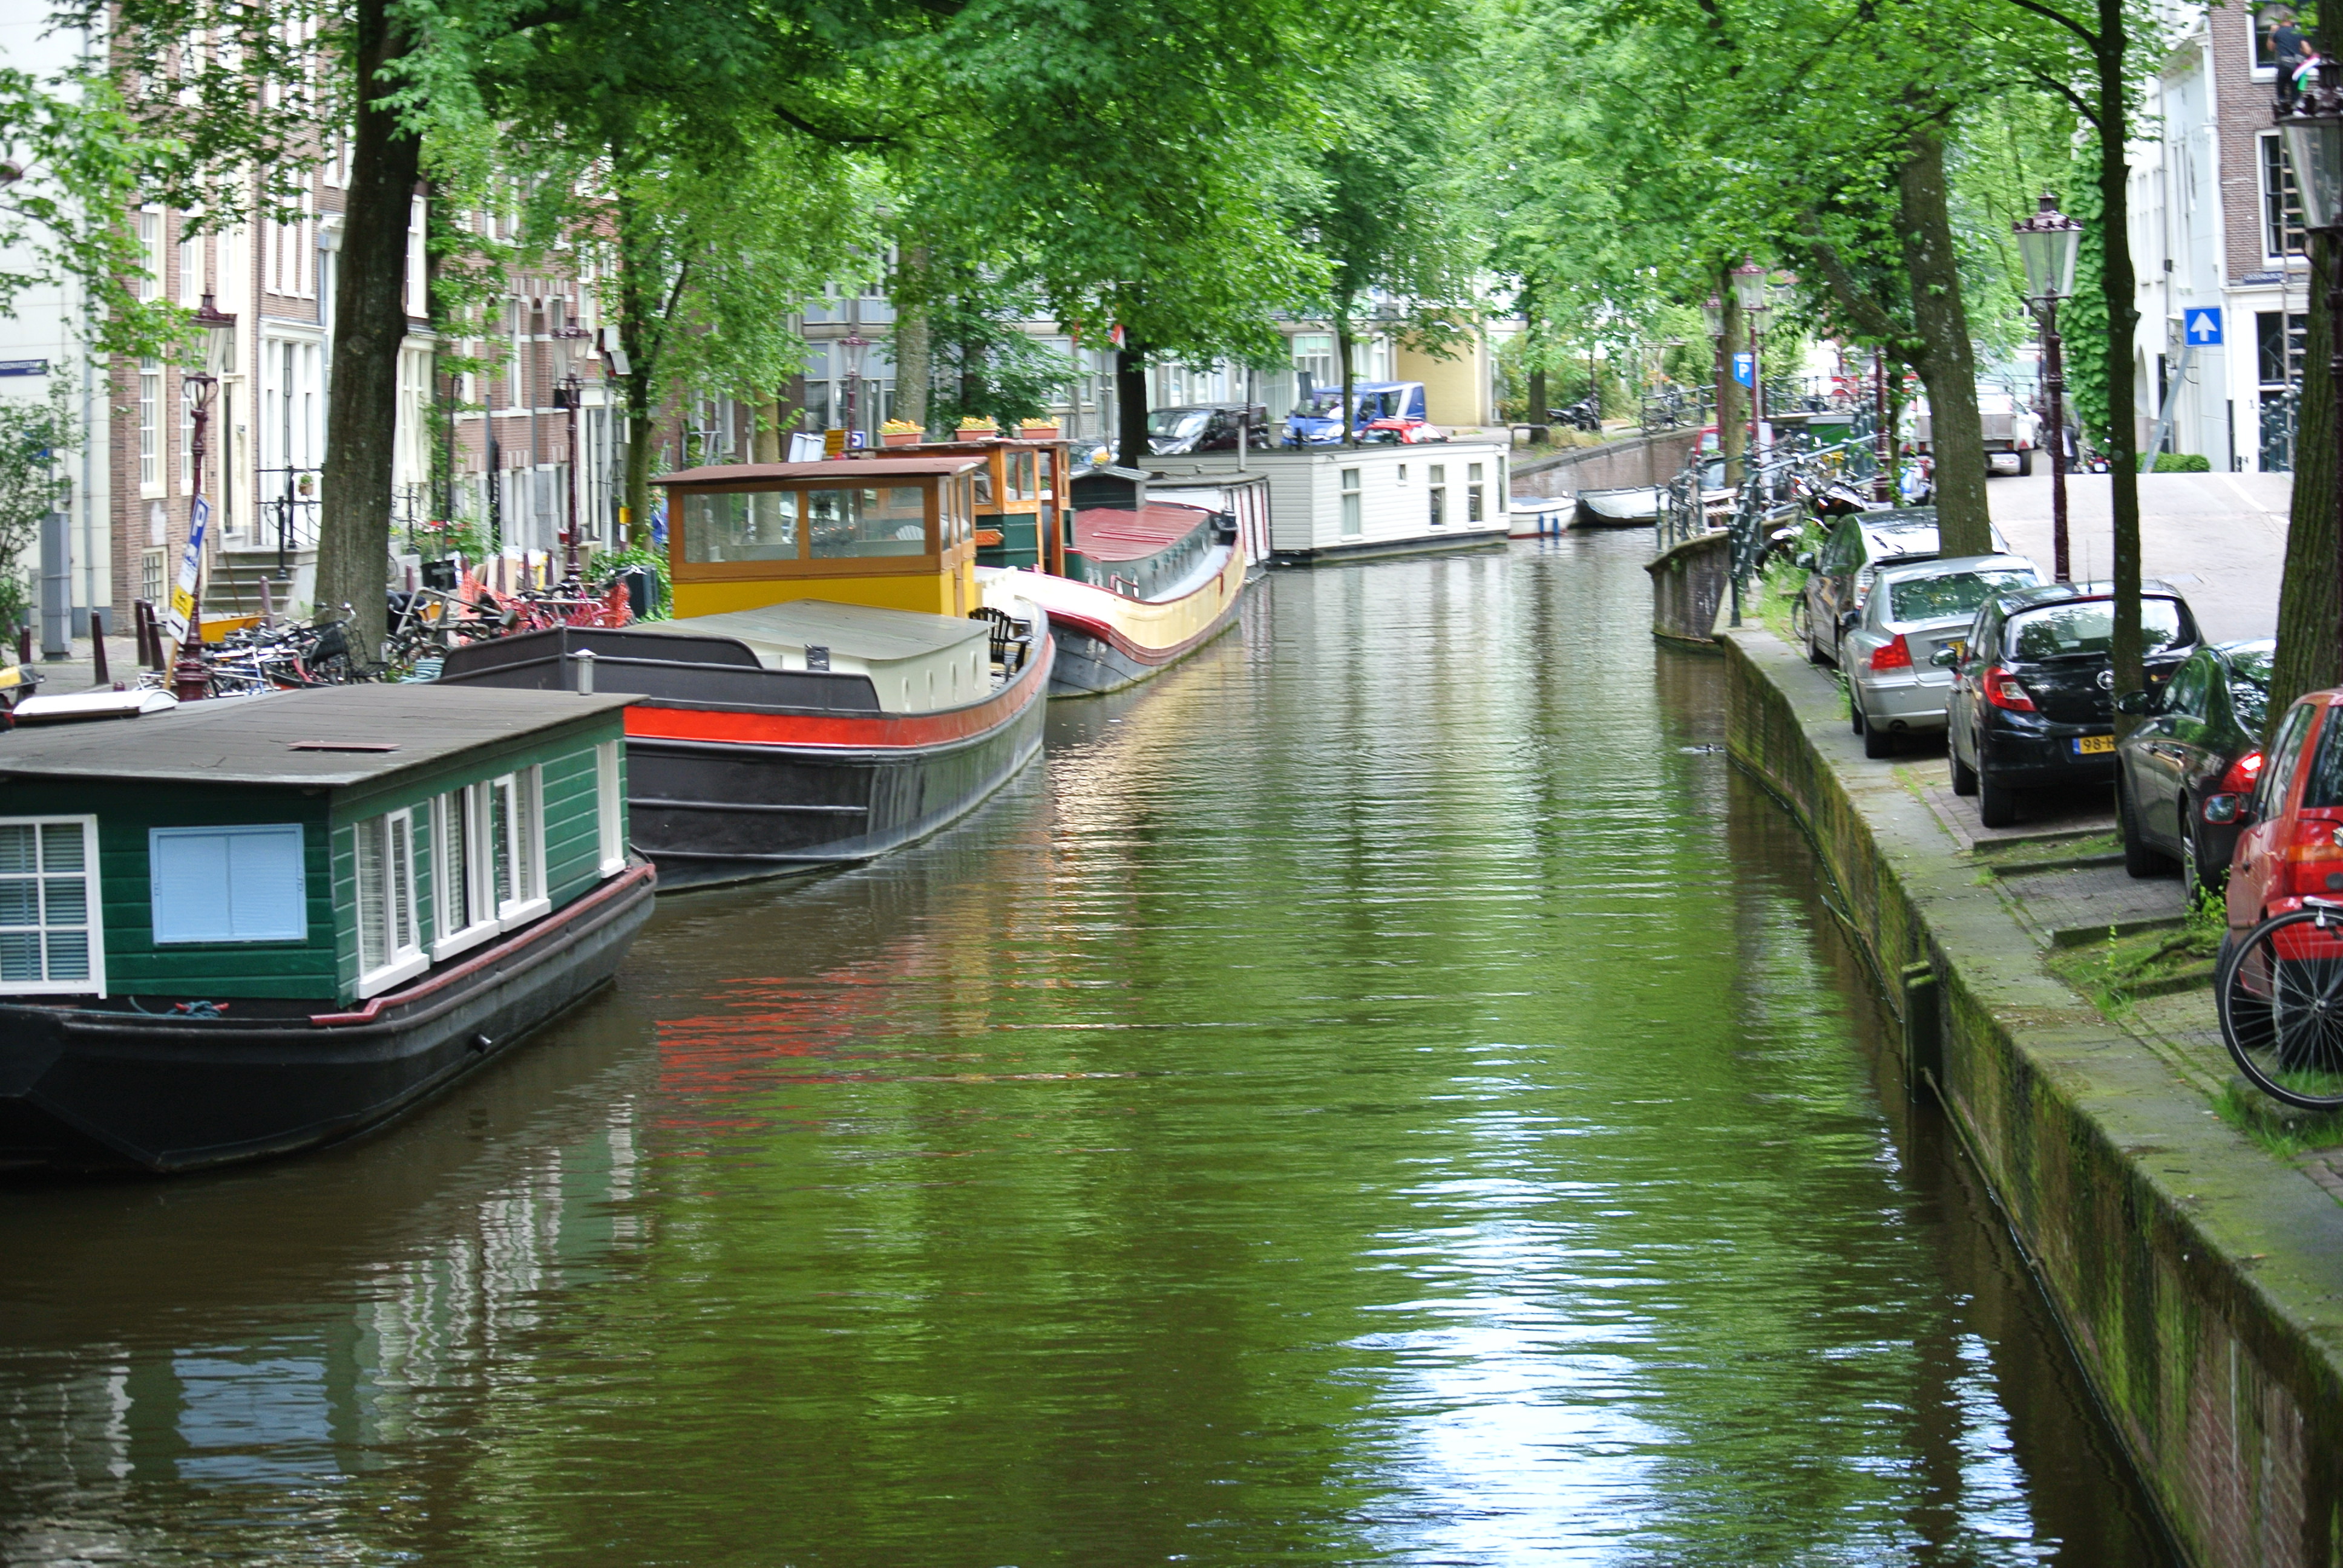 Boats in the Canal